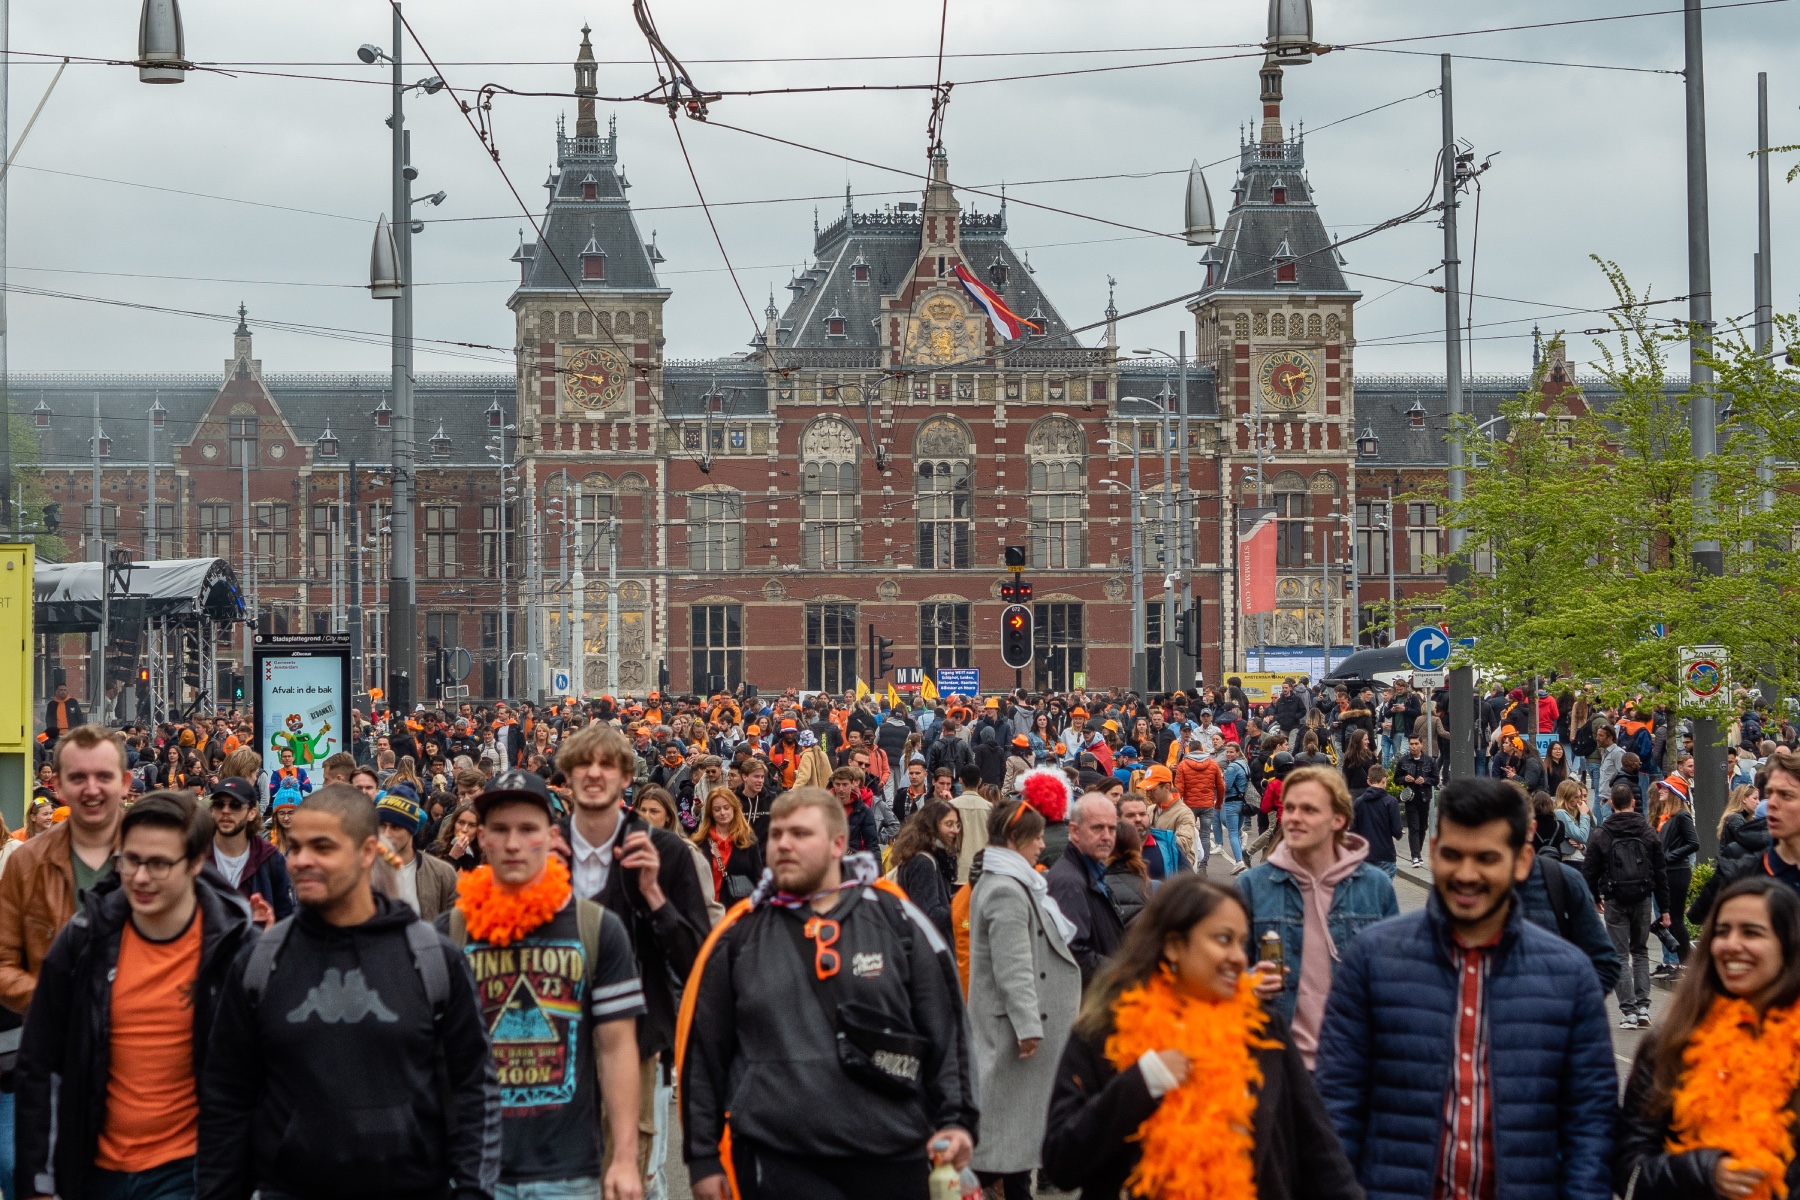 Hoards of people wearing orange and walking in front of Rijksmuseum in Amsterdam to celebrate King's Day